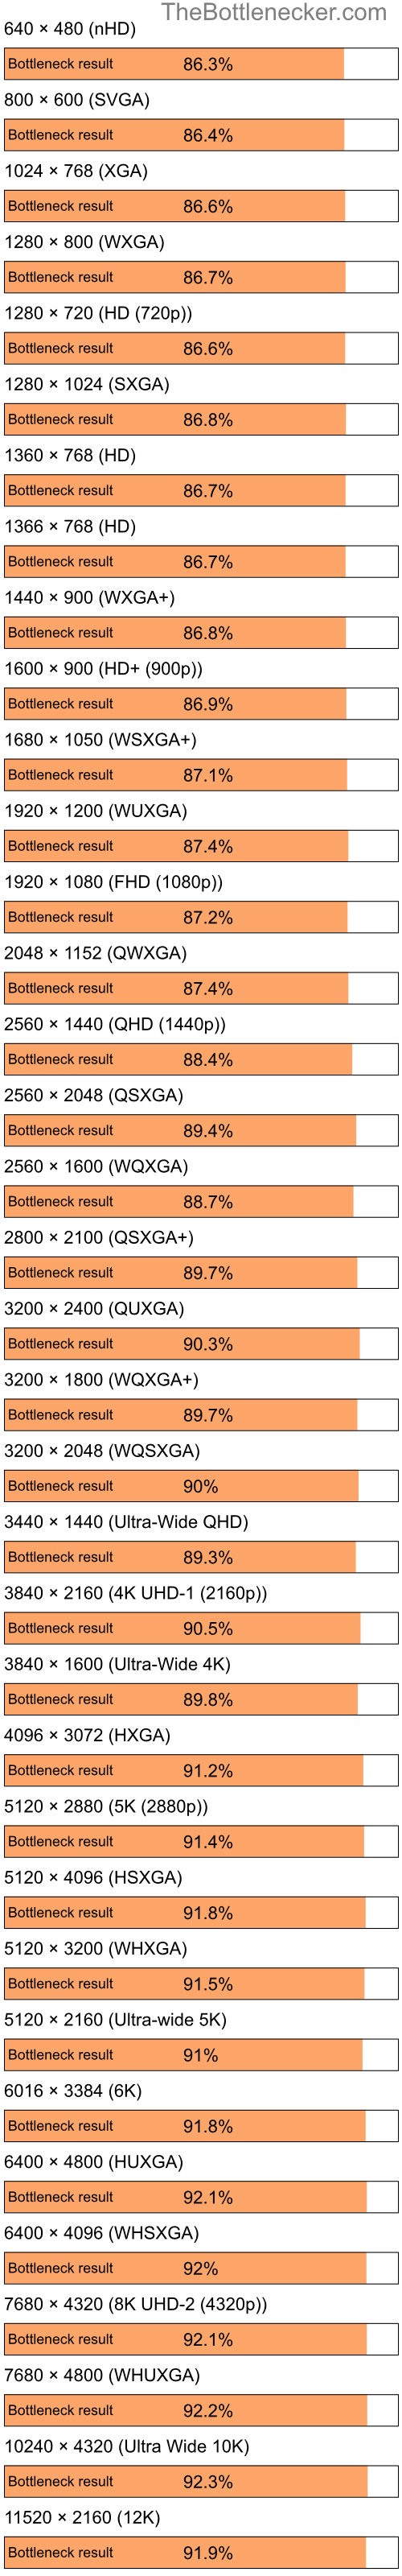 Bottleneck results by resolution for Intel Pentium 4 and NVIDIA GeForce2 Pro in Processor Intense Tasks